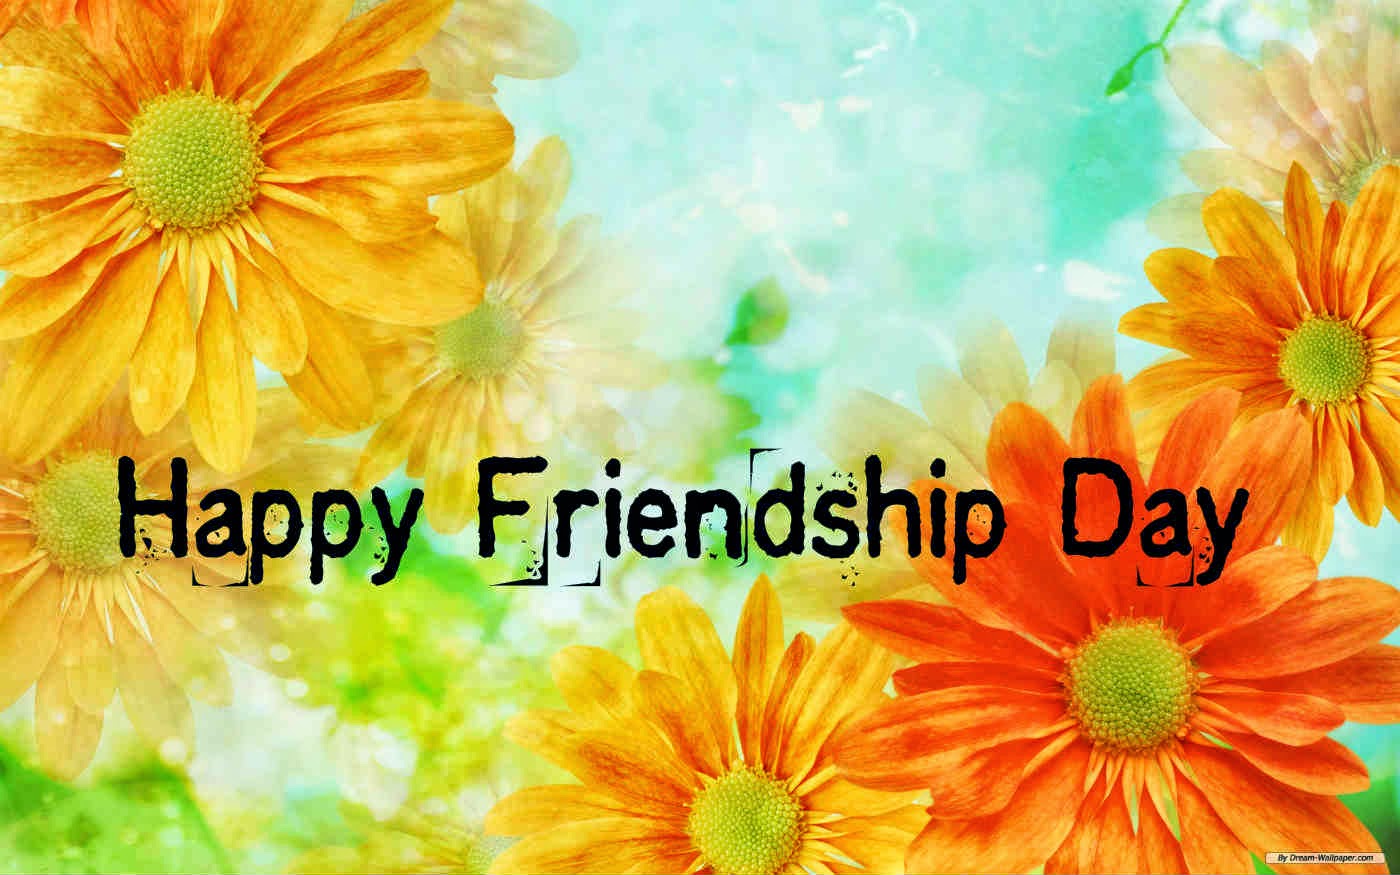 Happy Friendship Day Quotes Greetings Messages - Happy Friendship Day With Flowers - HD Wallpaper 